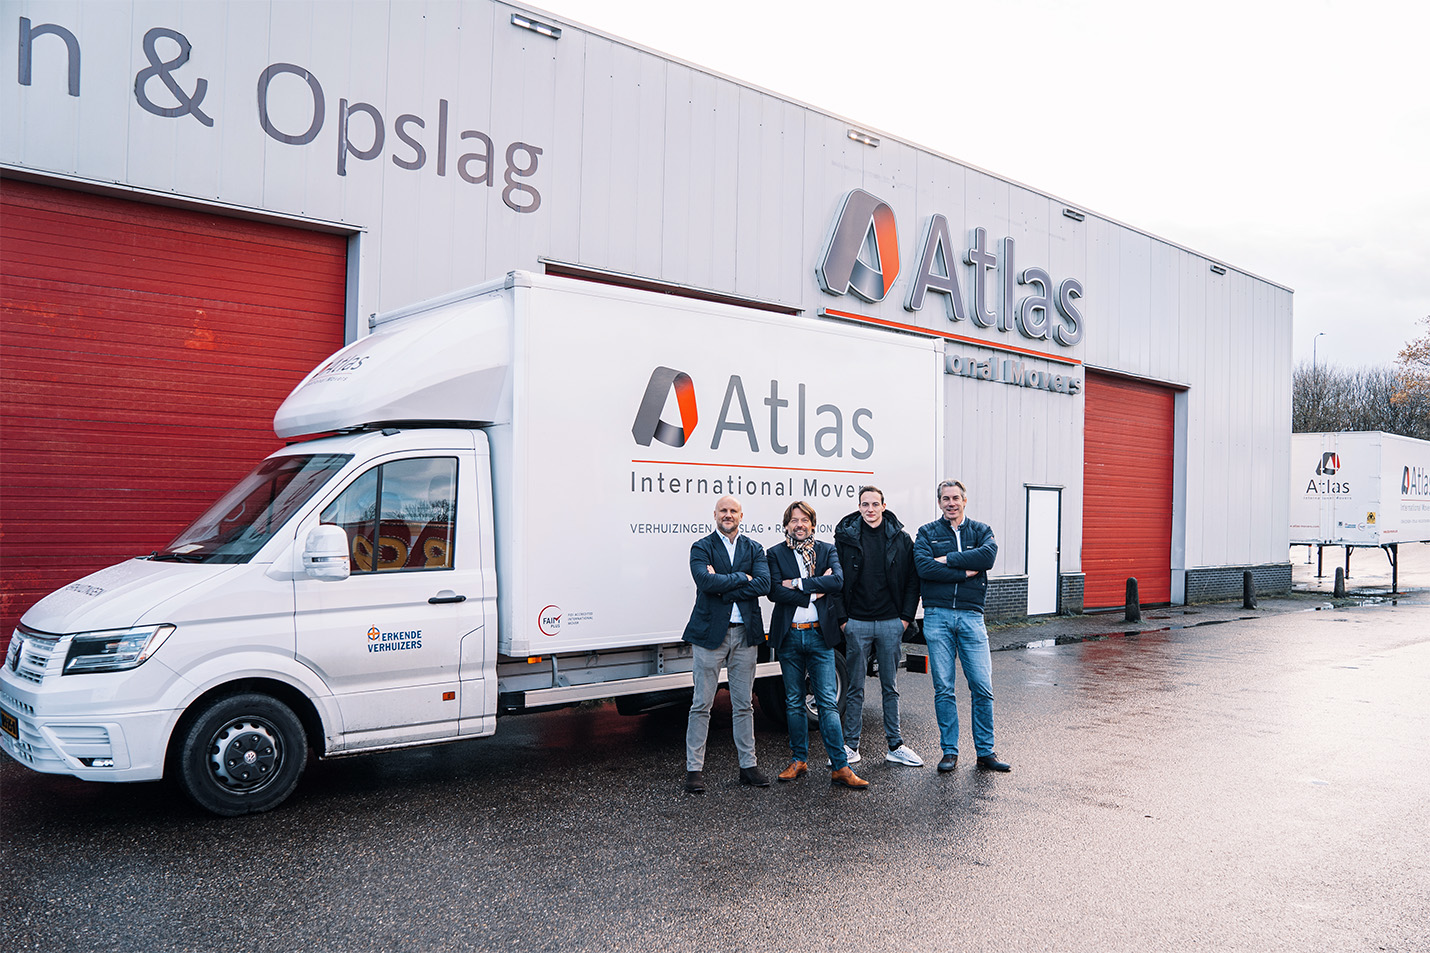 Employees of Atlas International Movers in front of a van